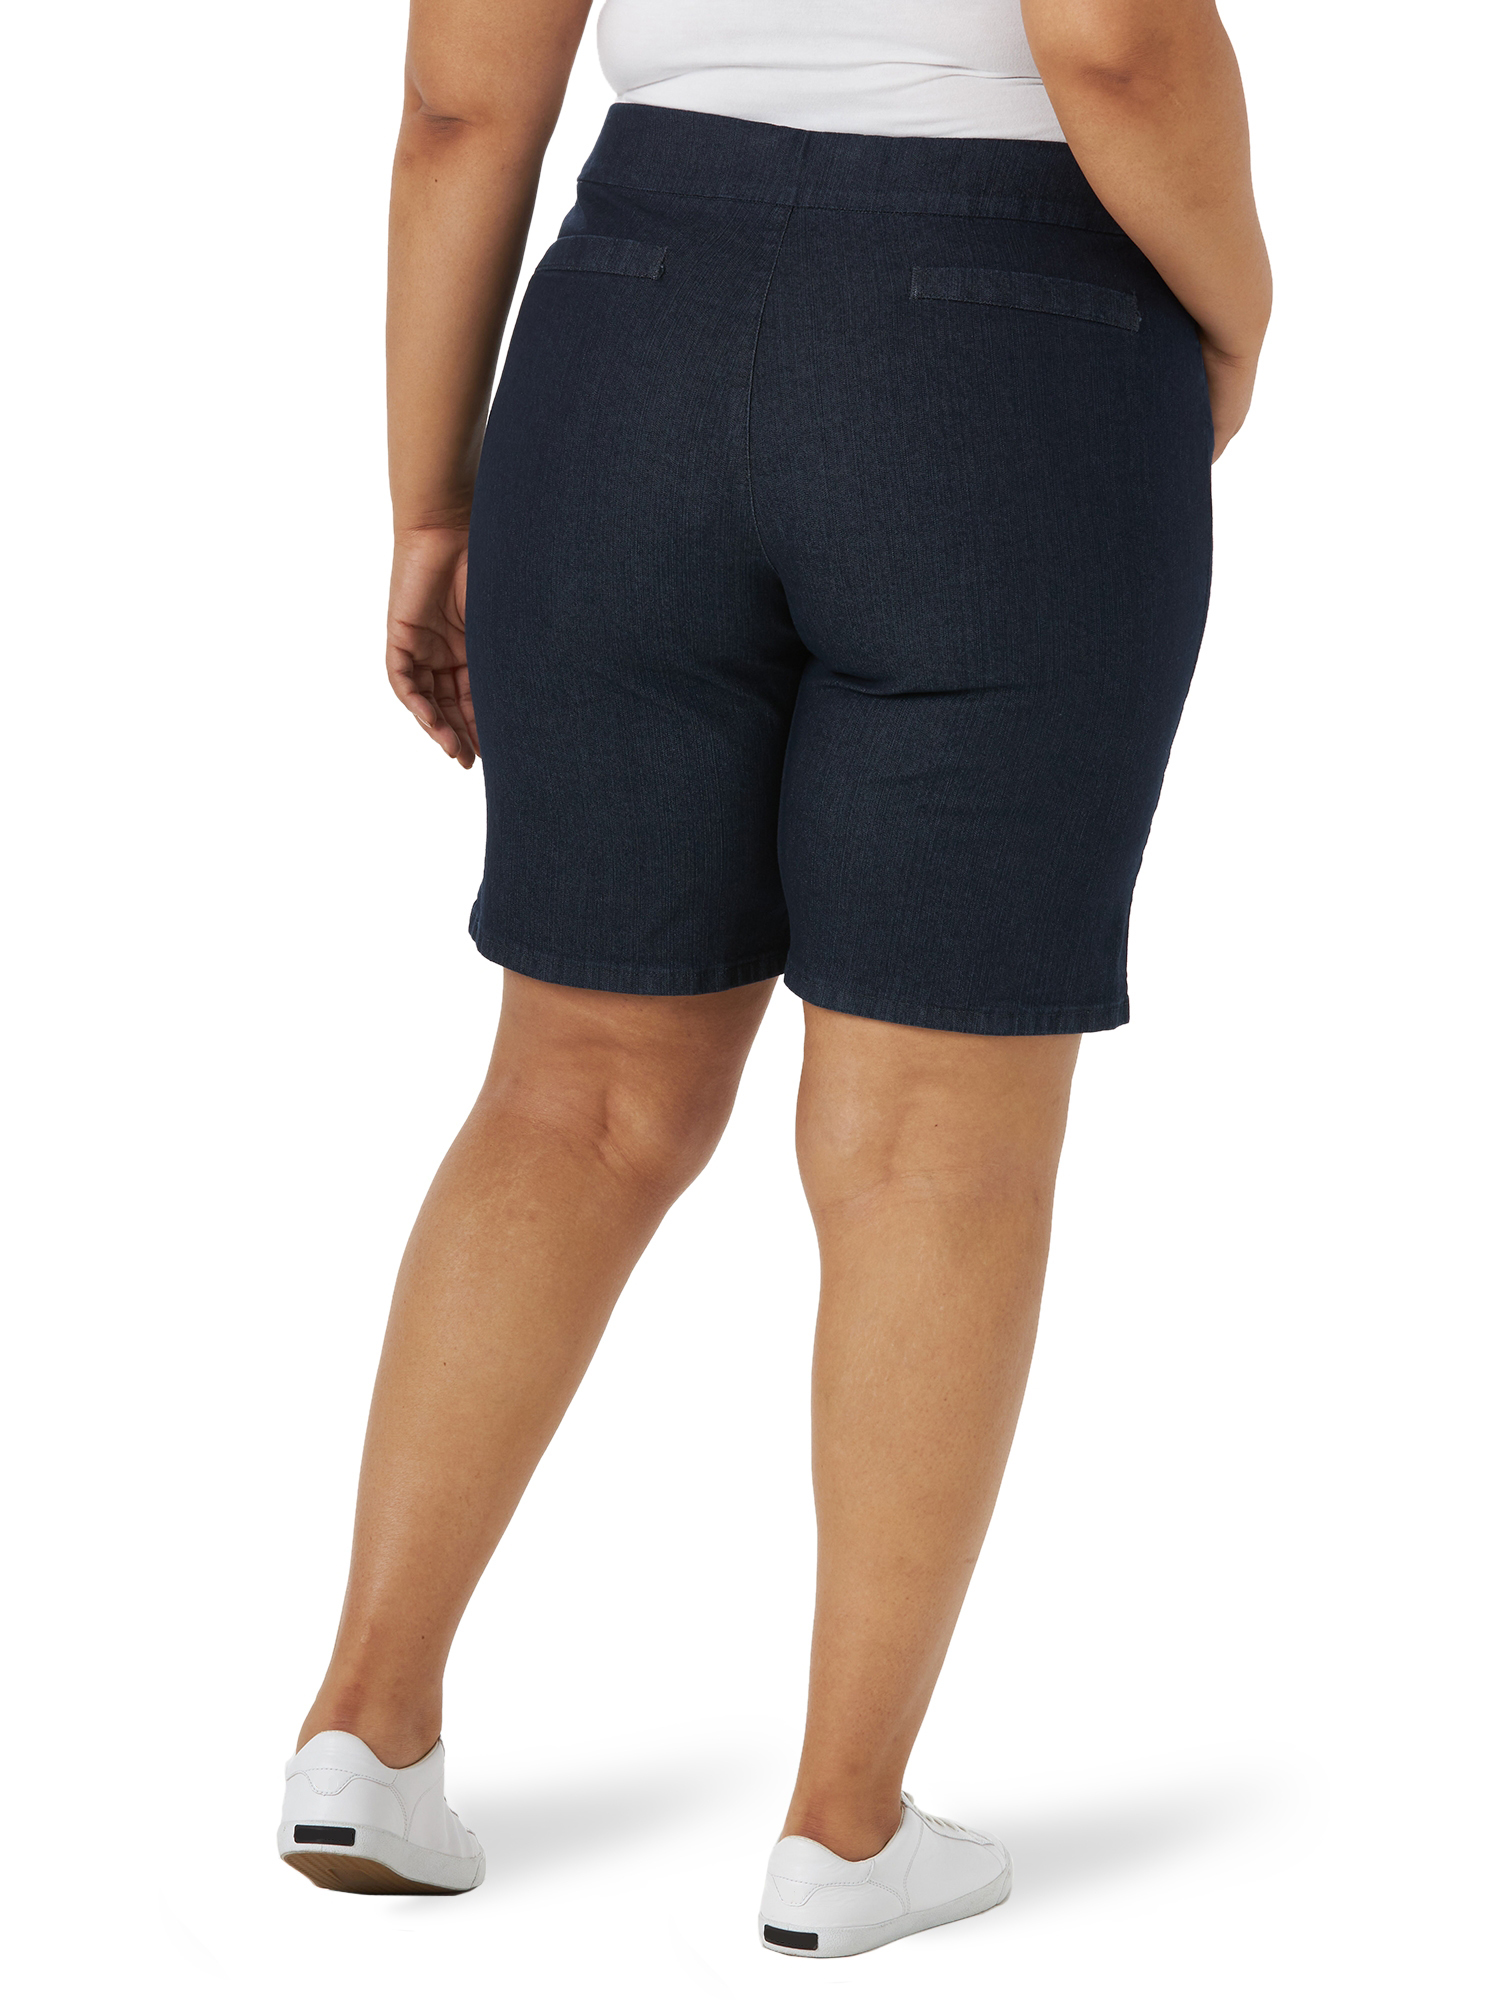 Chic Women's Plus Classic Collection Women's Plus Size Relaxed Fit Flat Bermuda Short - image 3 of 5